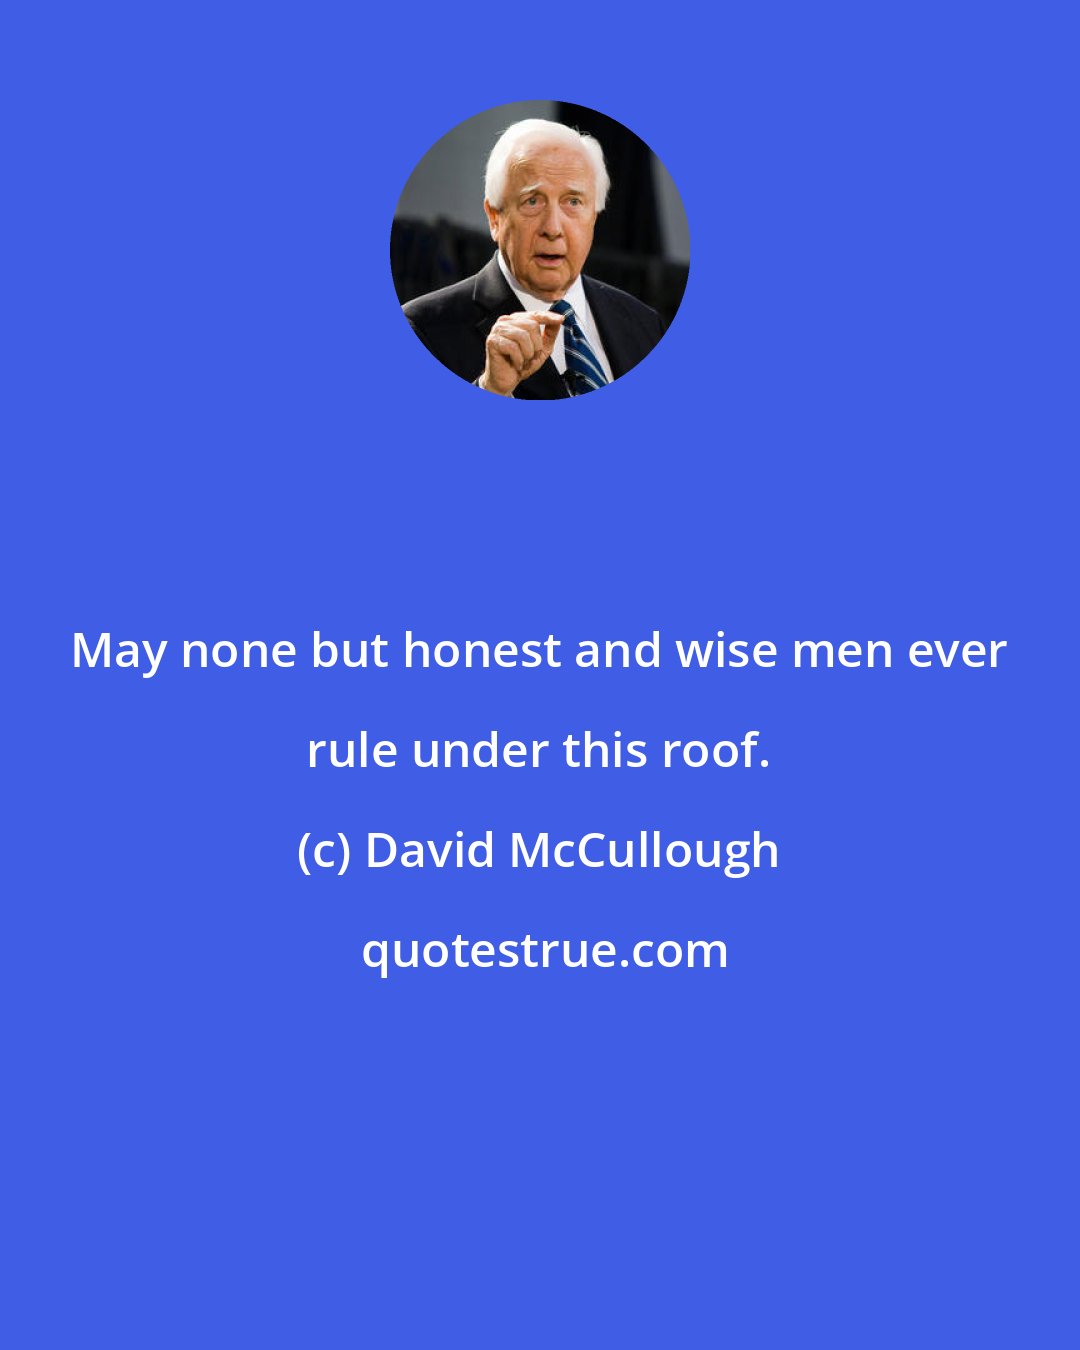 David McCullough: May none but honest and wise men ever rule under this roof.